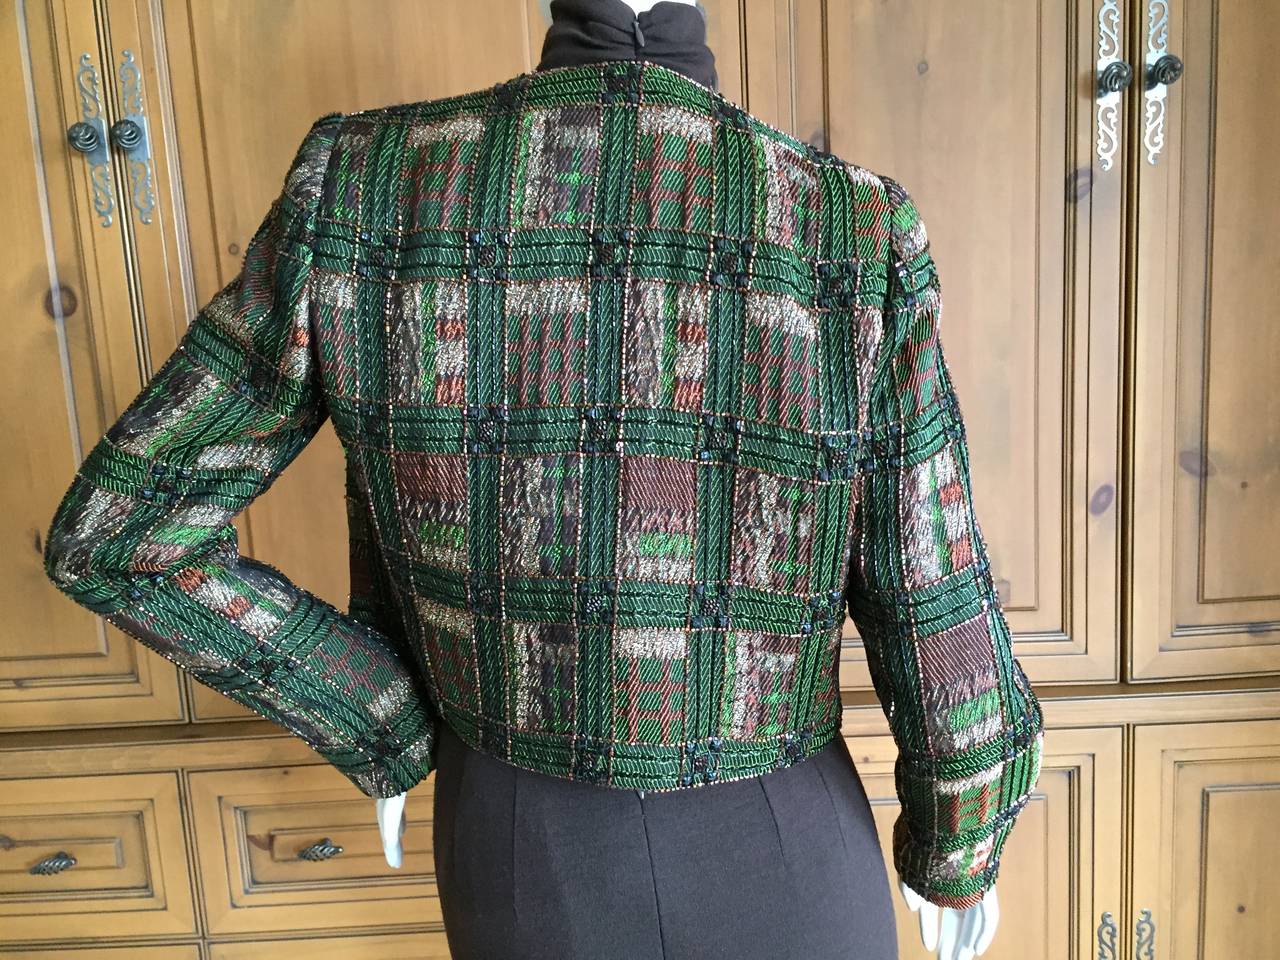 Bob Mackie Beaded Tartan Jacket
The jacket is a delightful tartan pattern embellished with beading and jet crystals, subtle and sublime.
Jacket;
Bust 36